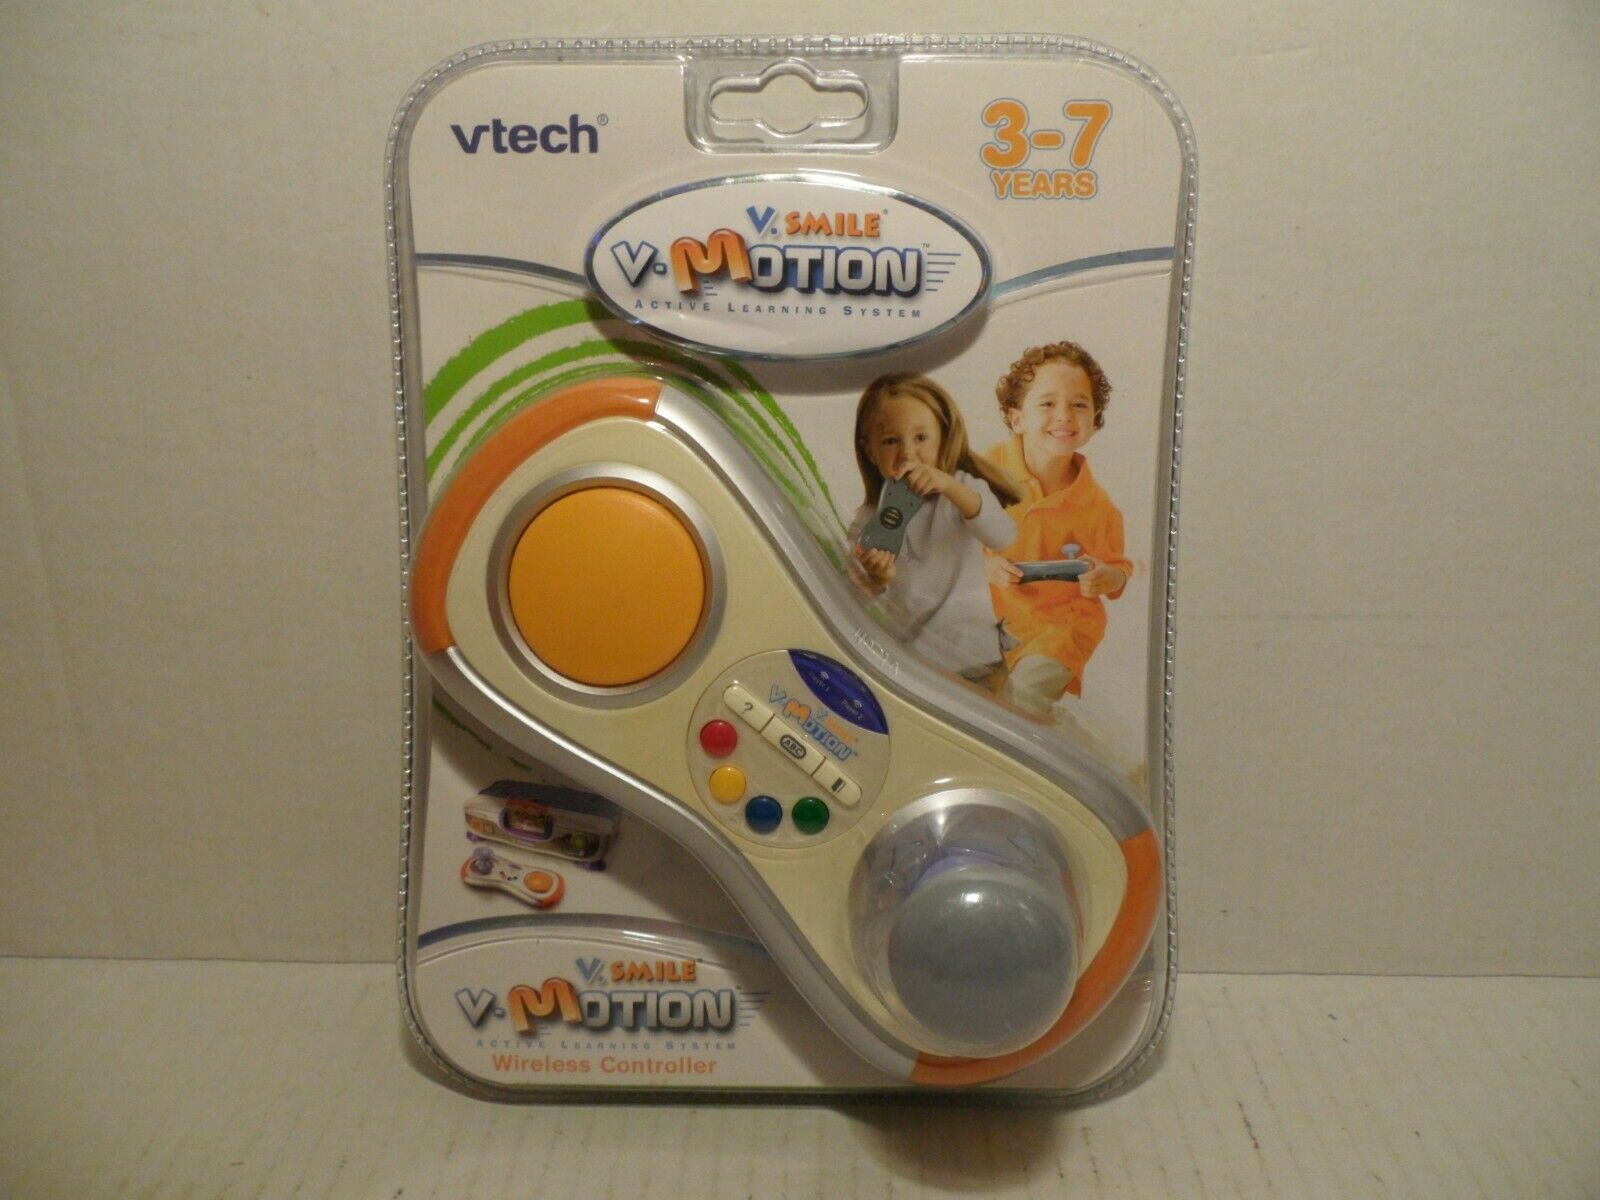 Vtech Motion V-smile active learning system wireless controller New and Sealed